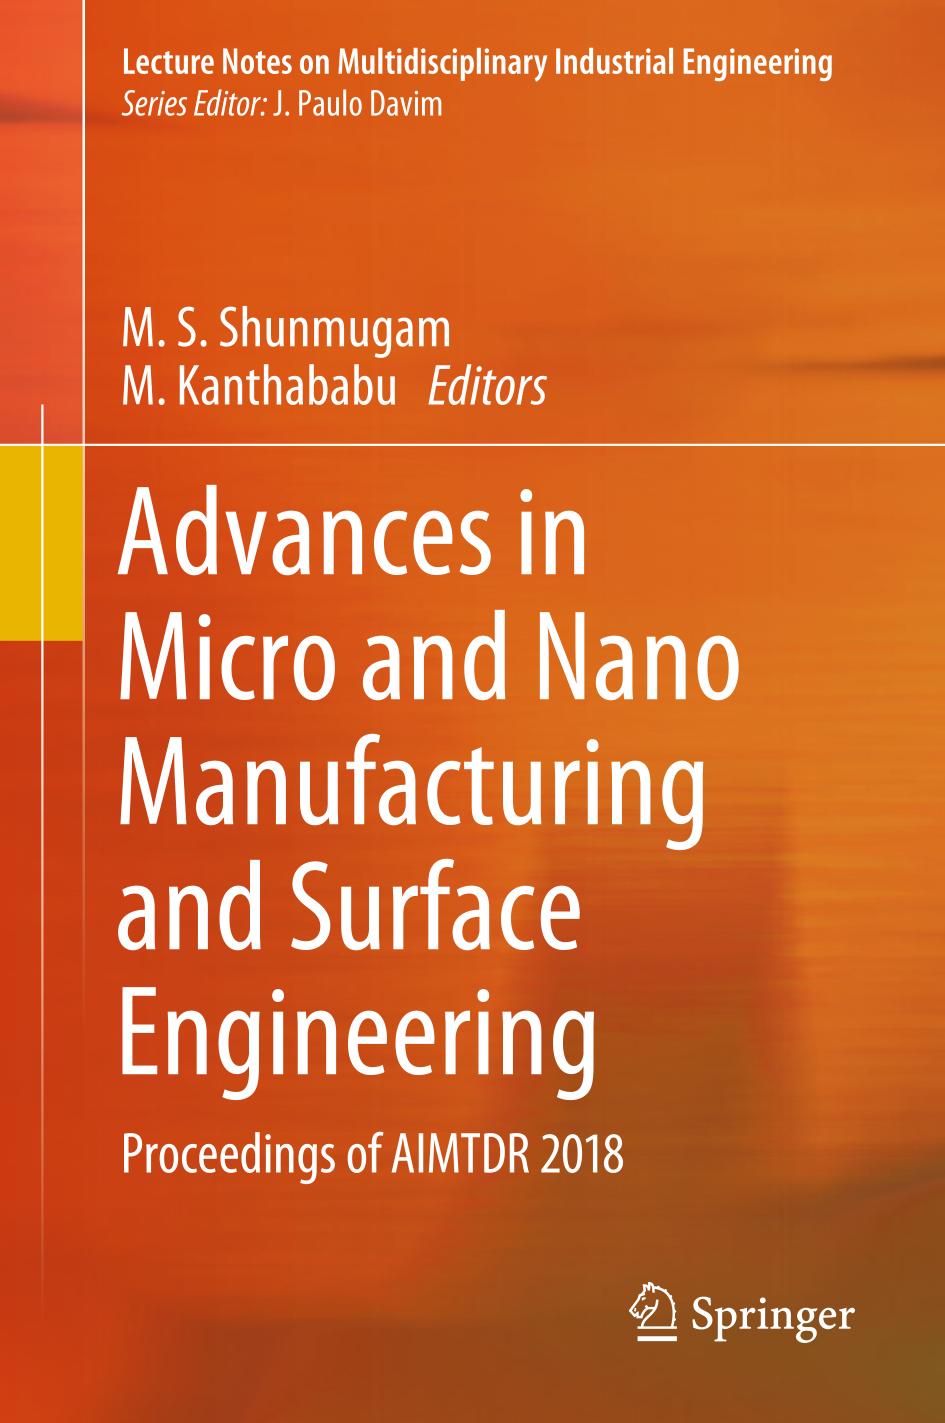 Advances in Micro and Nano Manufacturing and Surface Engineering : Proceedings of AIMTDR 2018.